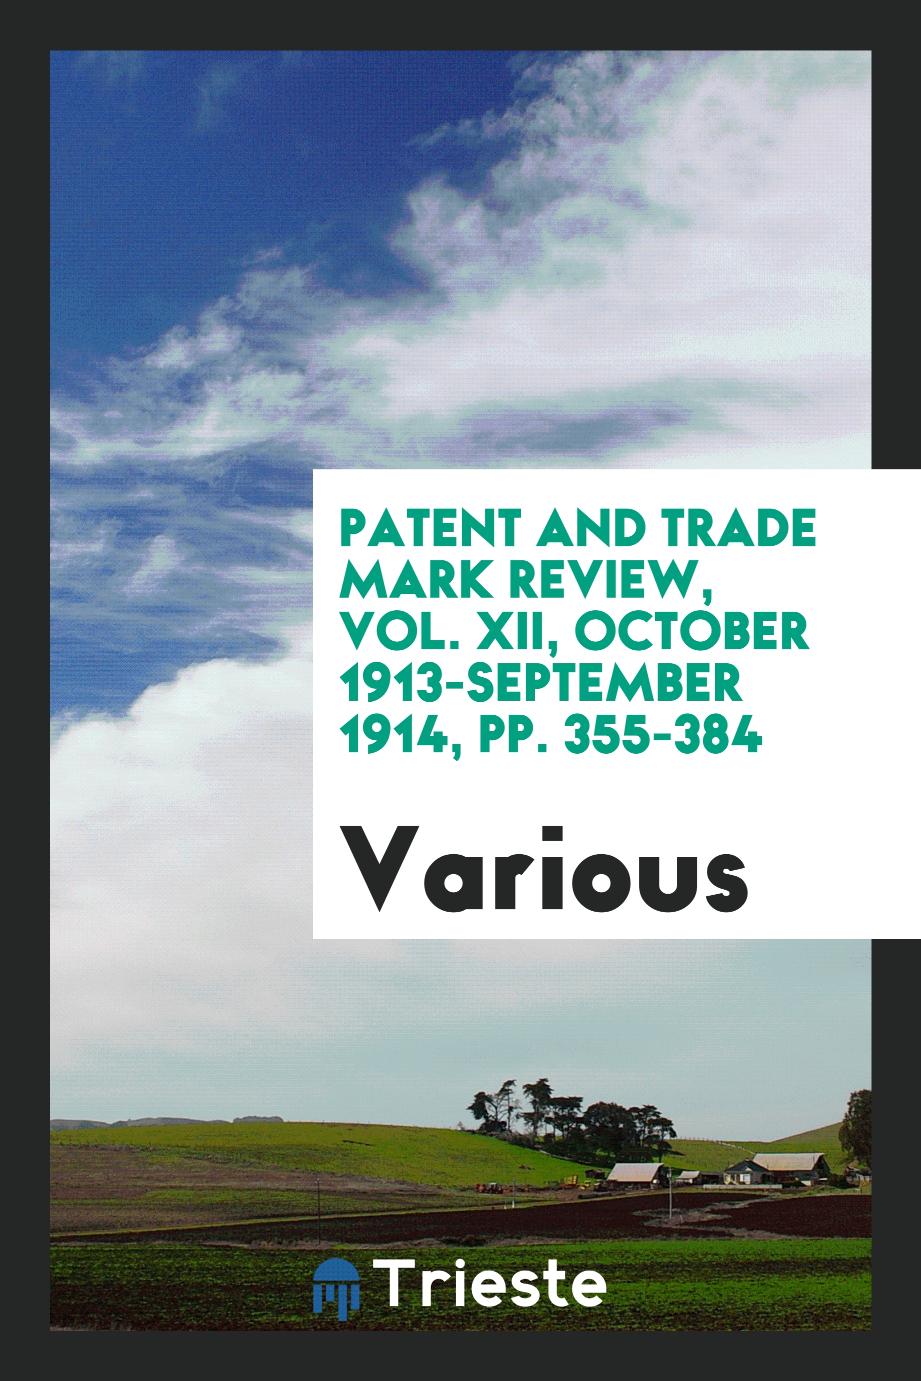 Patent and trade mark review, Vol. XII, October 1913-September 1914, pp. 355-384